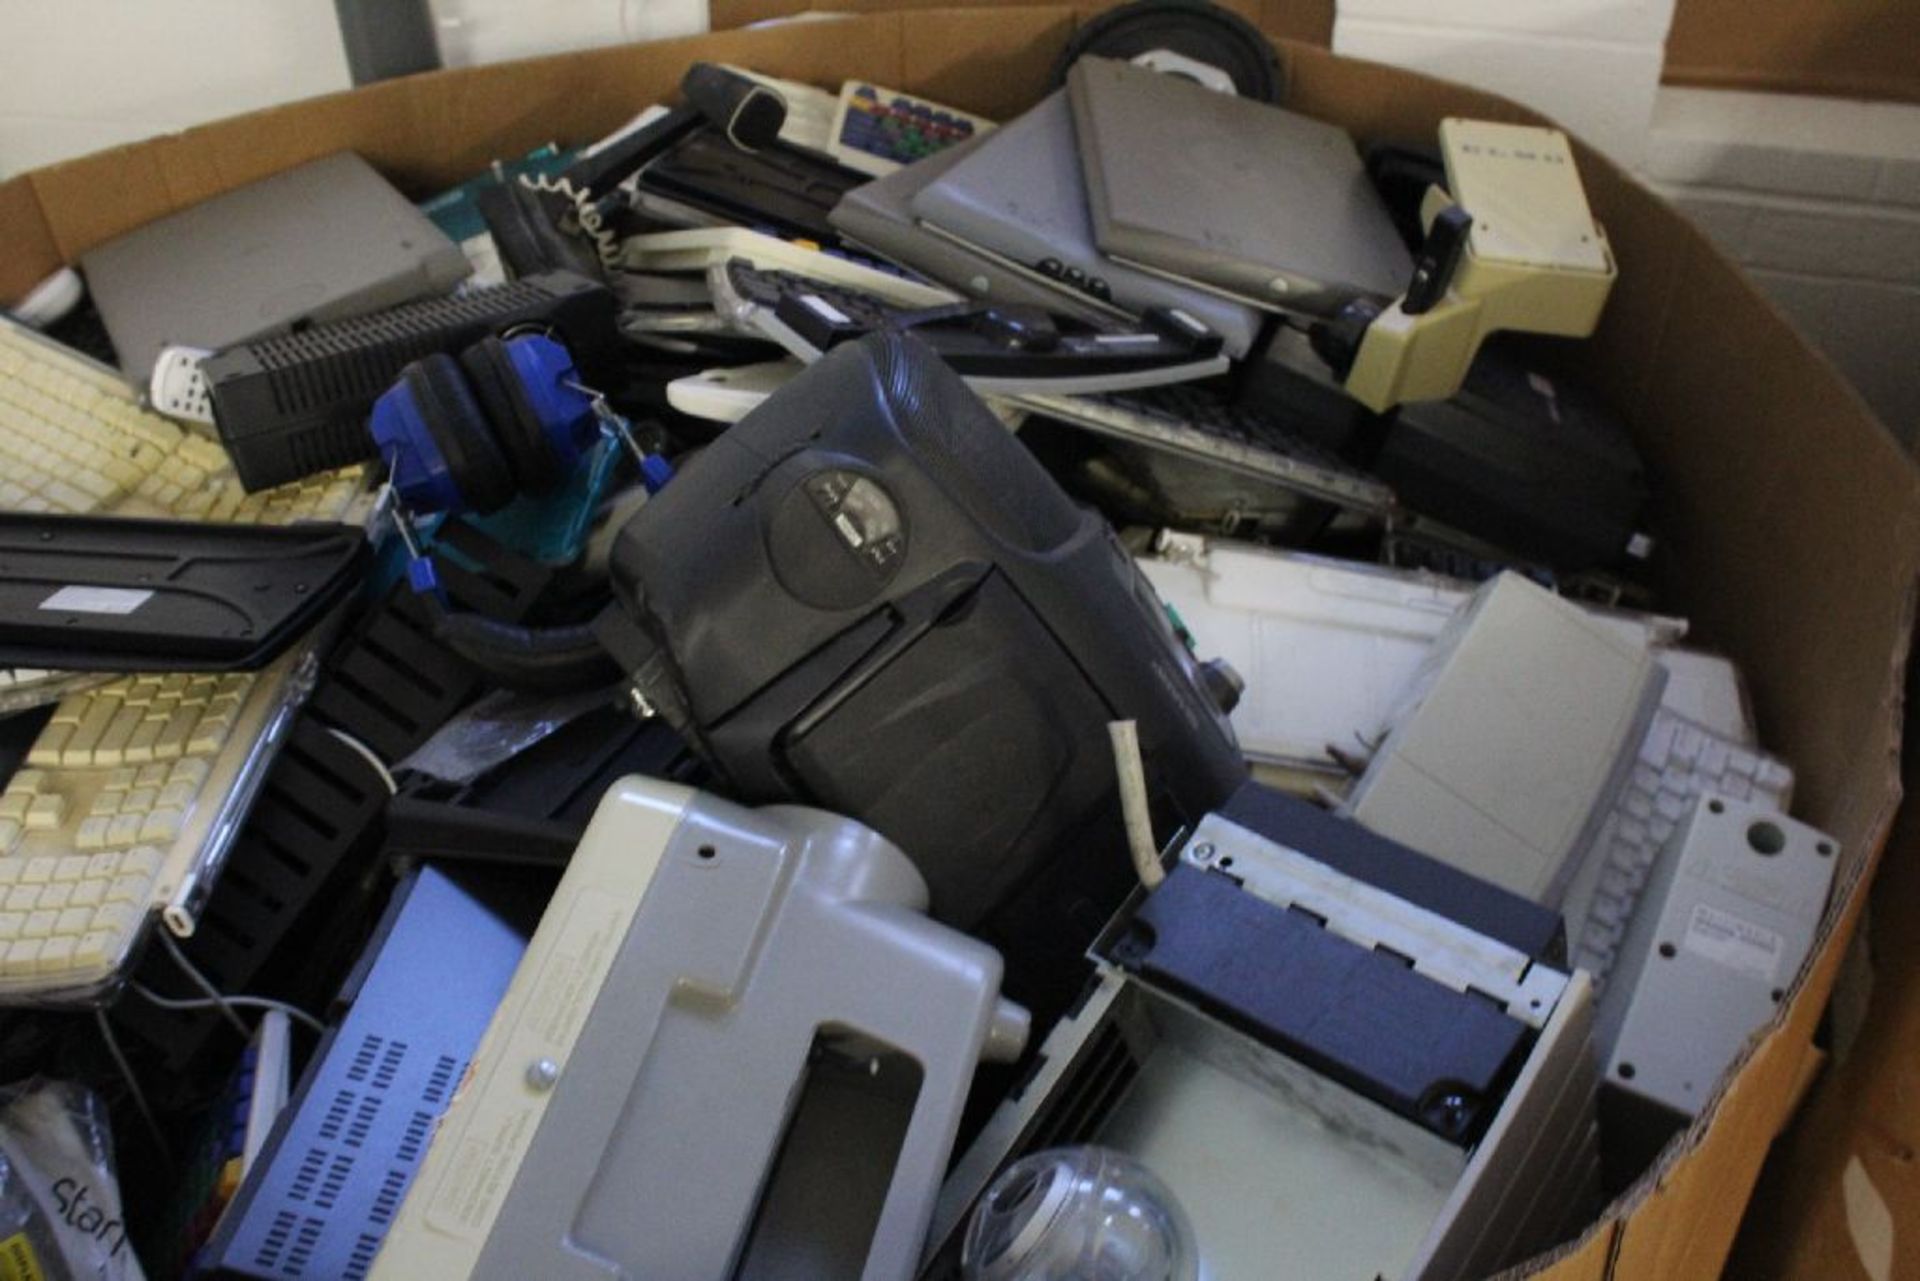 ASSORTED ELECTRONIC SCRAP INCLUDING KEYBOARDS, PROJECTORS, AND PLASTIC HOUSINGS - Image 2 of 2